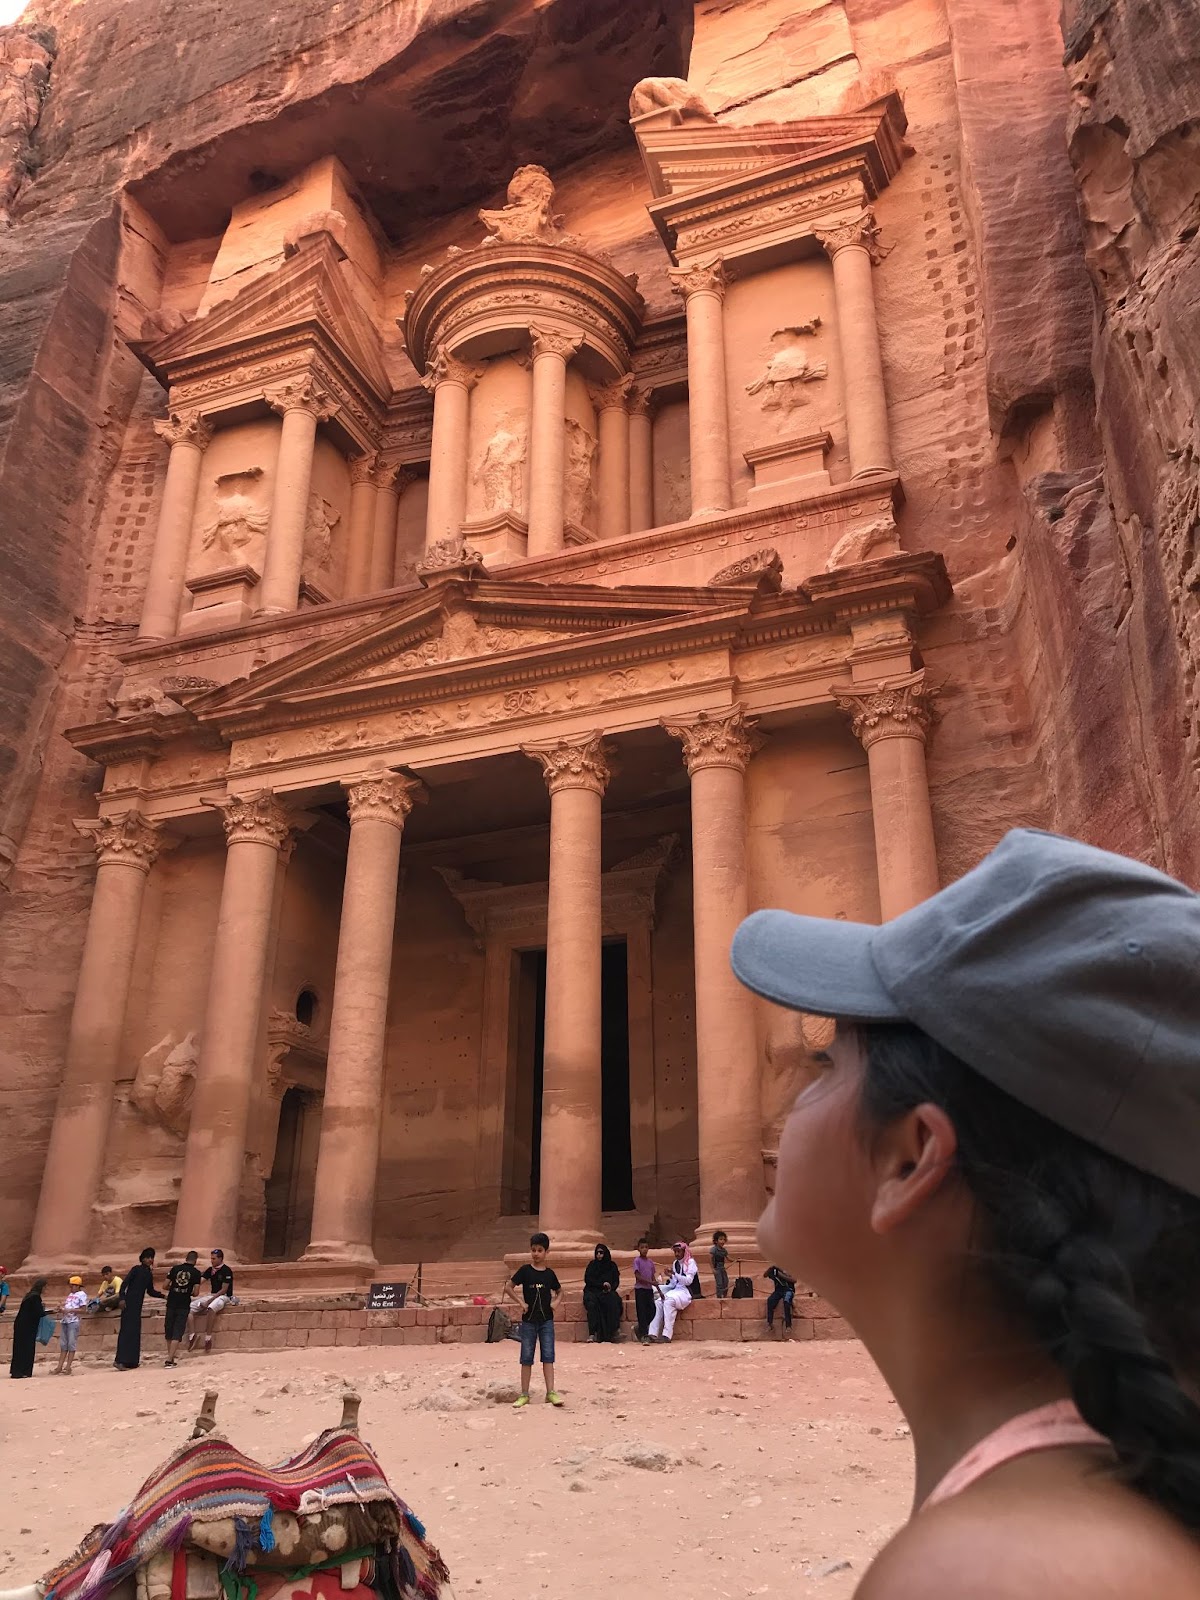 A young woman in a cap looking toward the tall, sand colored pillars of an apparently ancient structure.